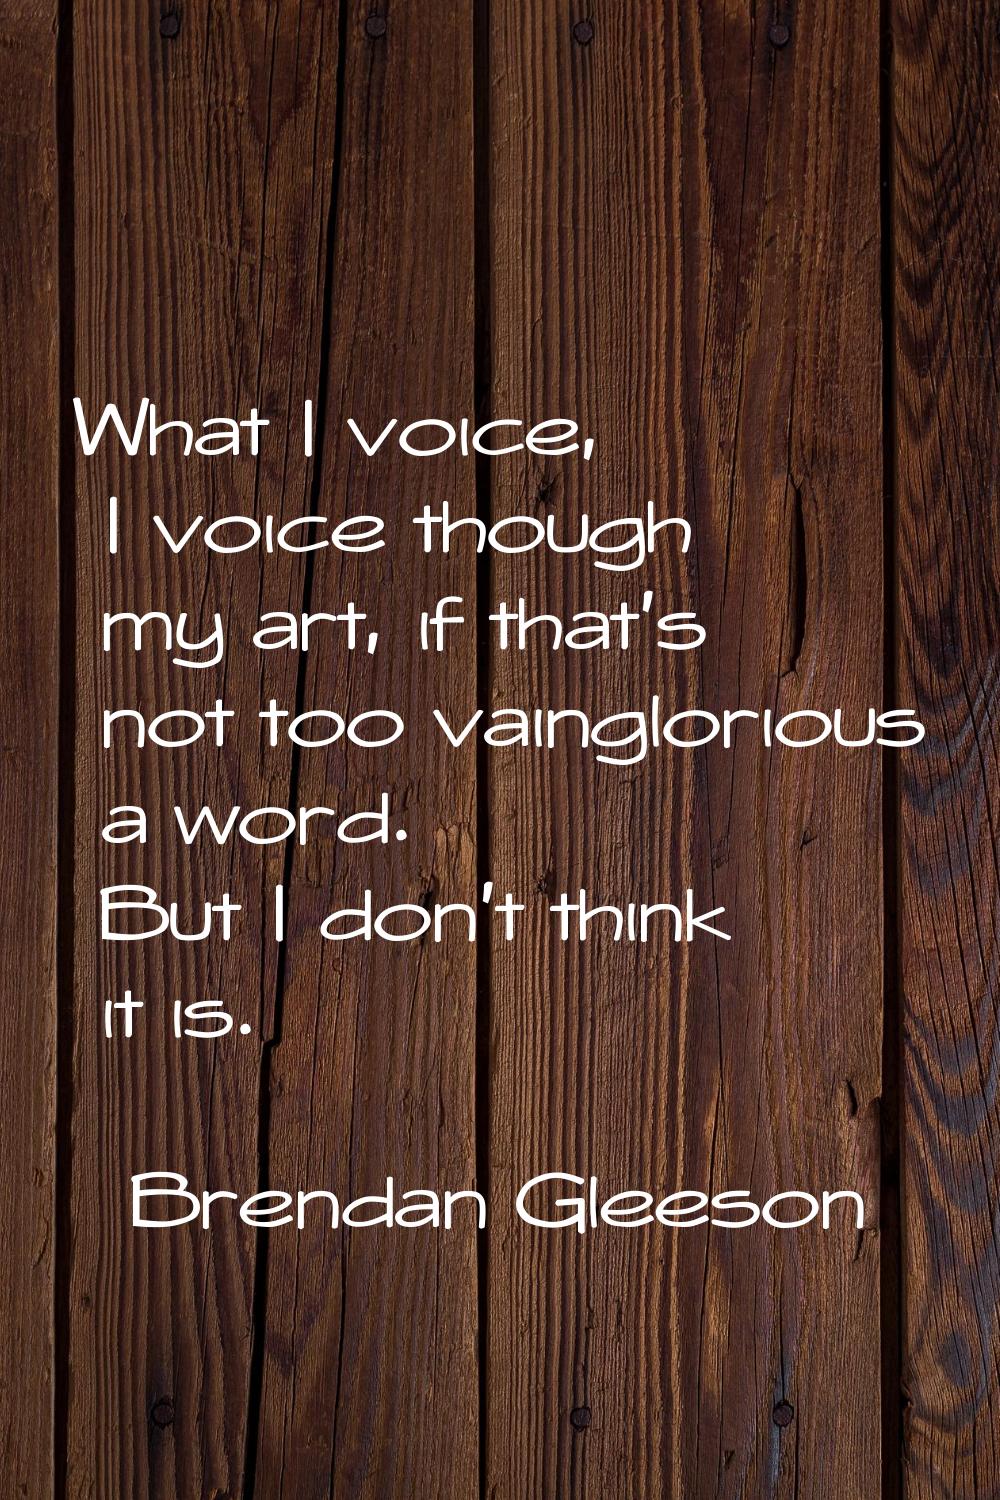 What I voice, I voice though my art, if that's not too vainglorious a word. But I don't think it is